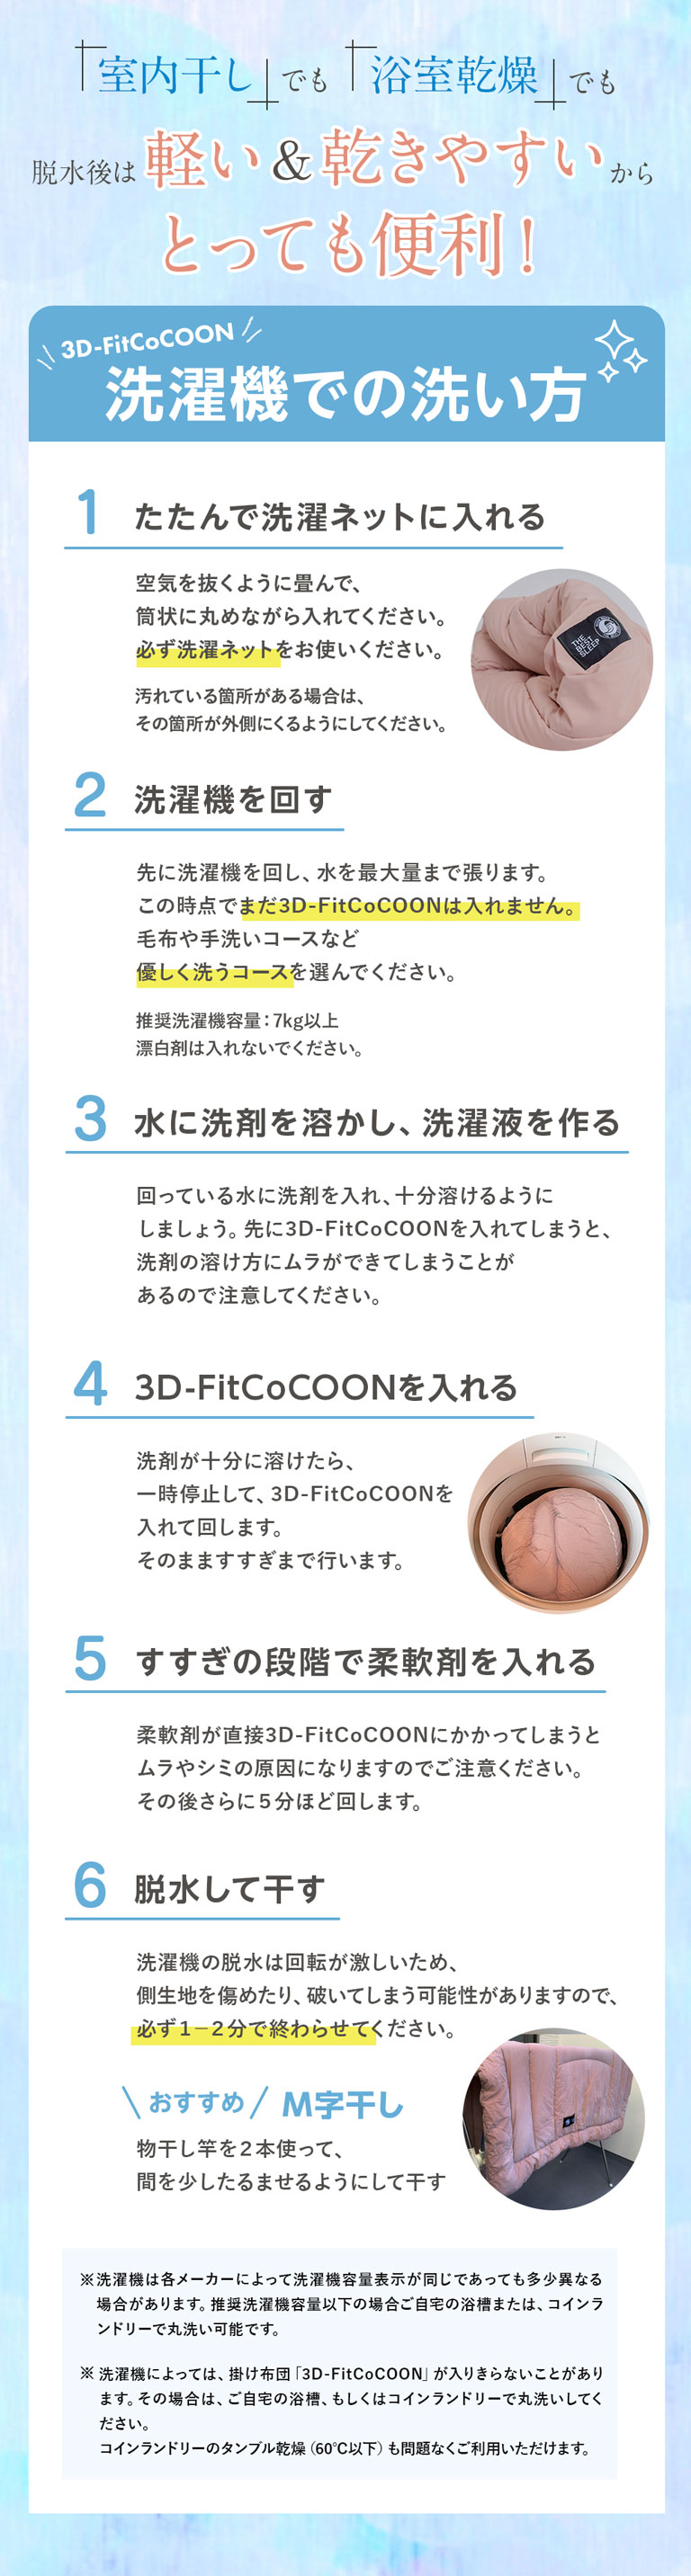 3Dフィット掛け布団 3D-Fit CoCOON